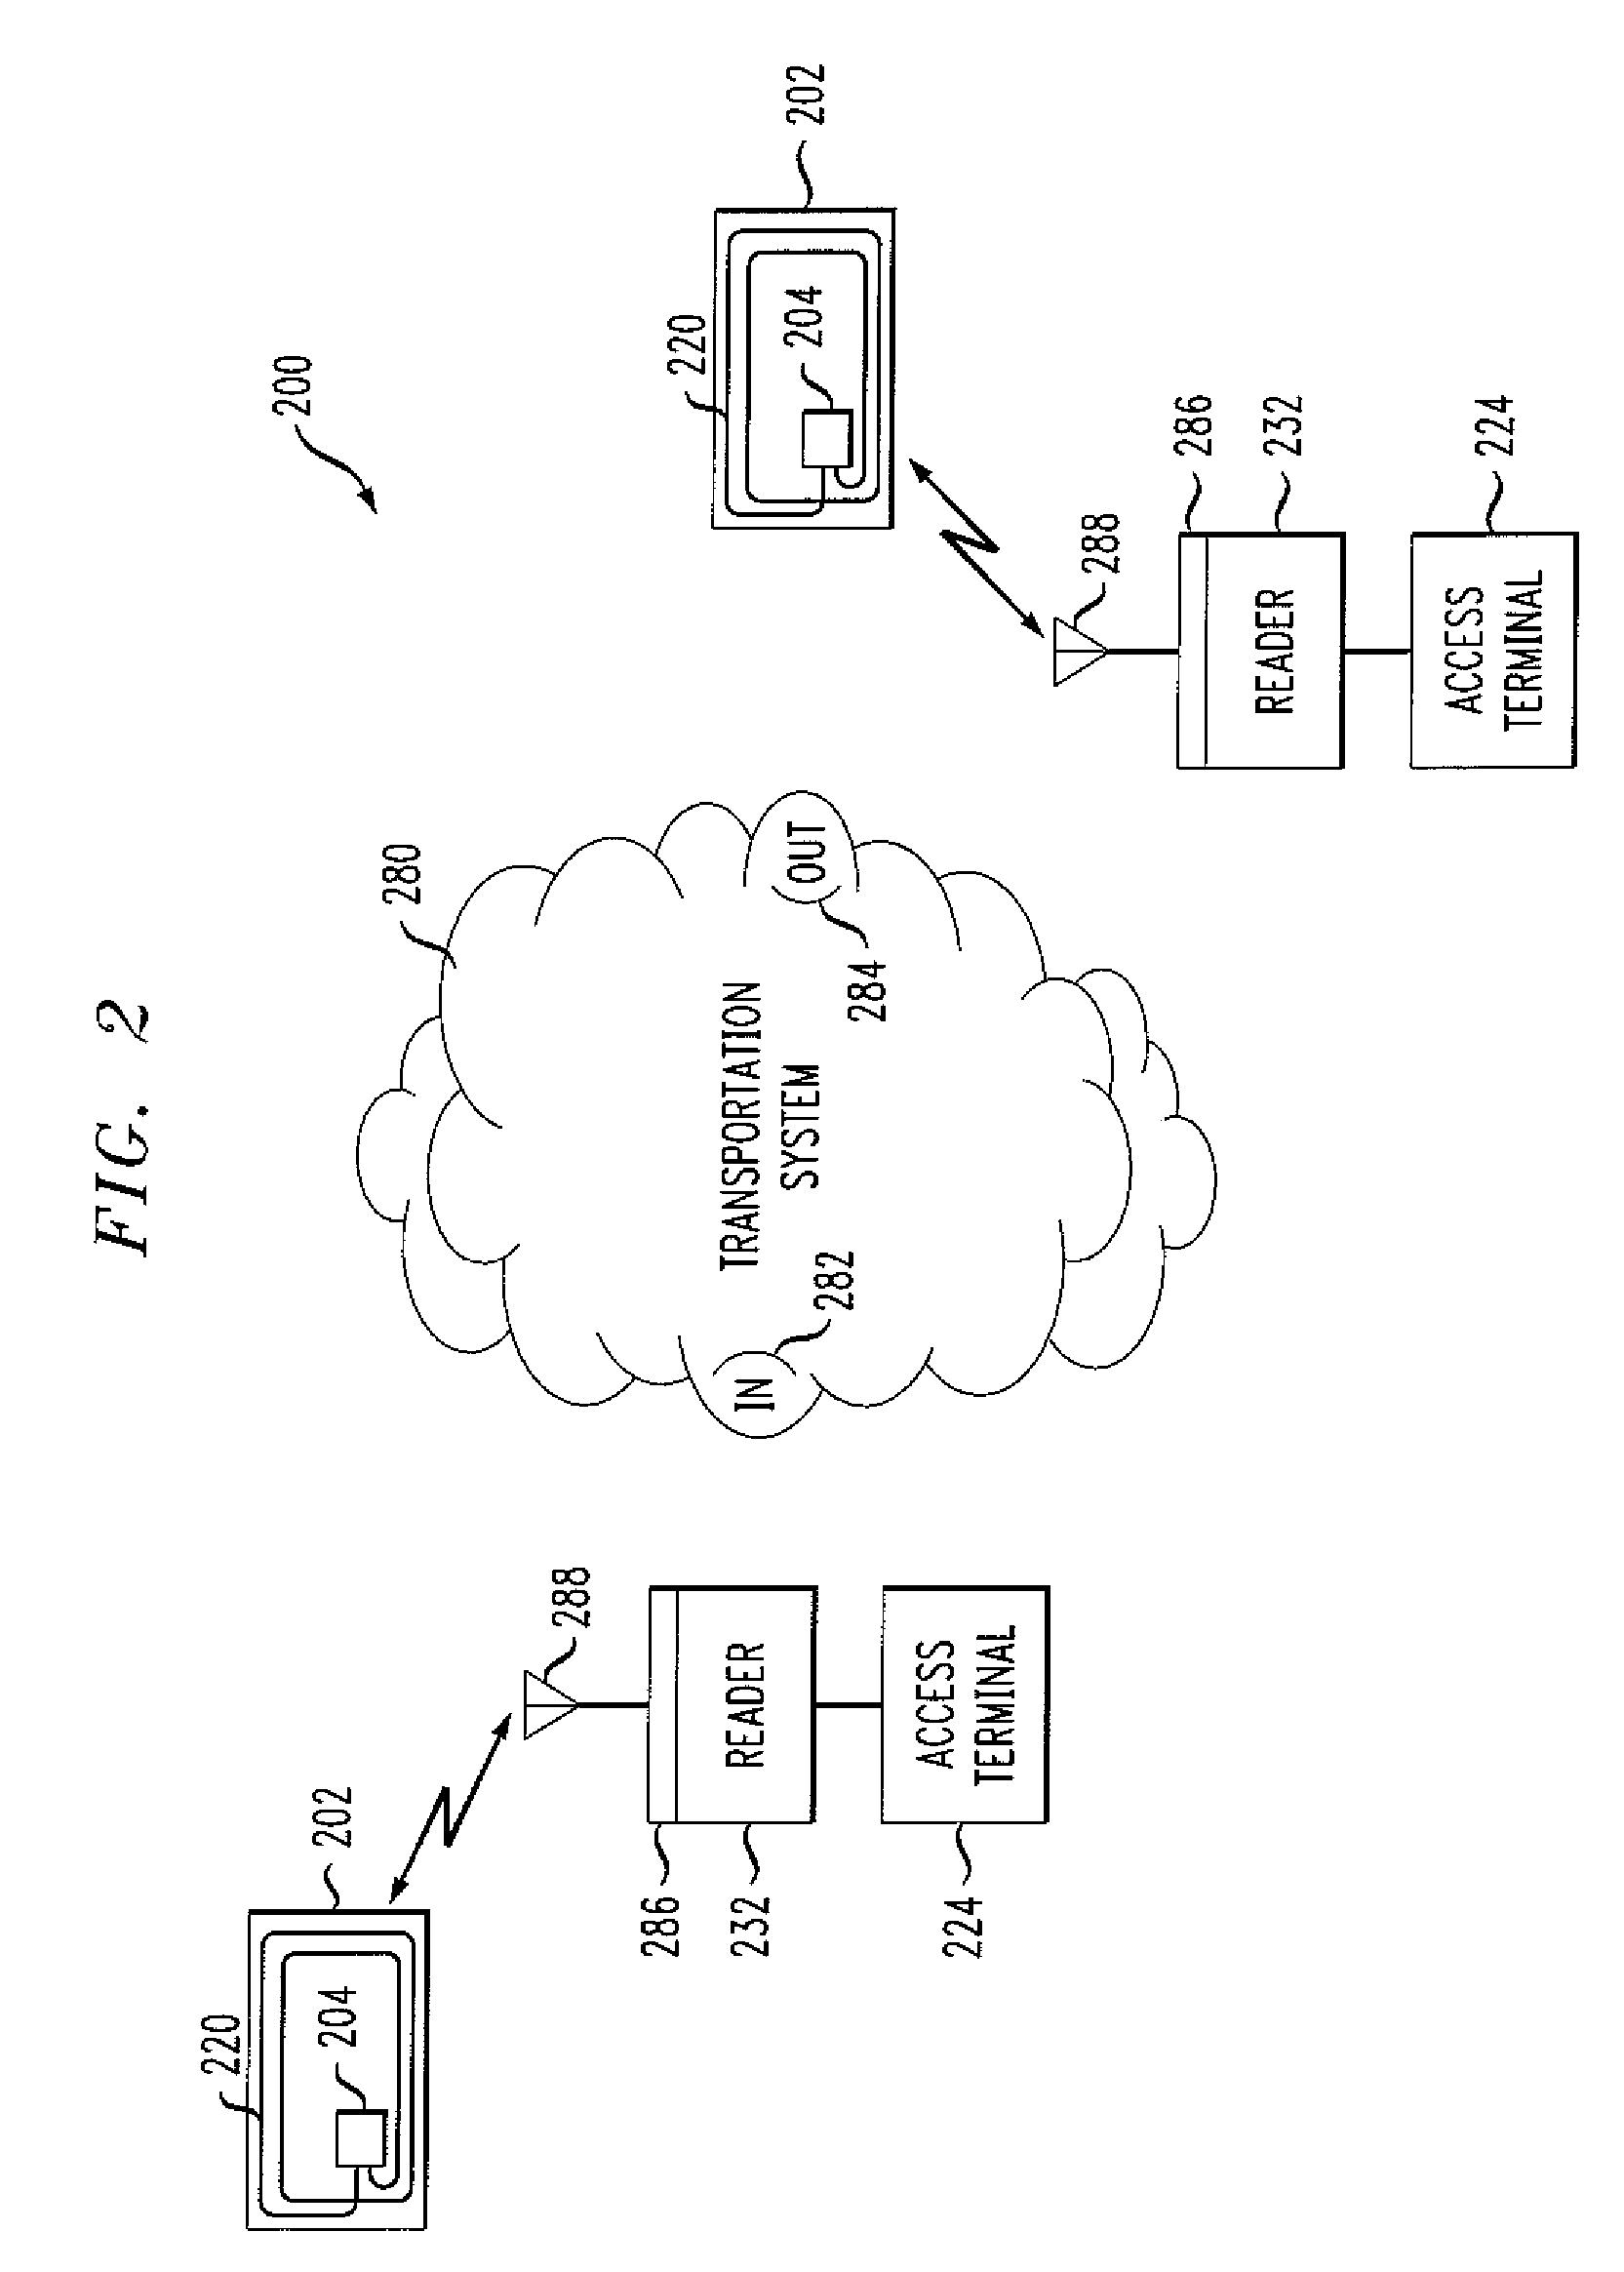 Techniques for co-existence of multiple stored value applications on a single payment device managing a shared balance